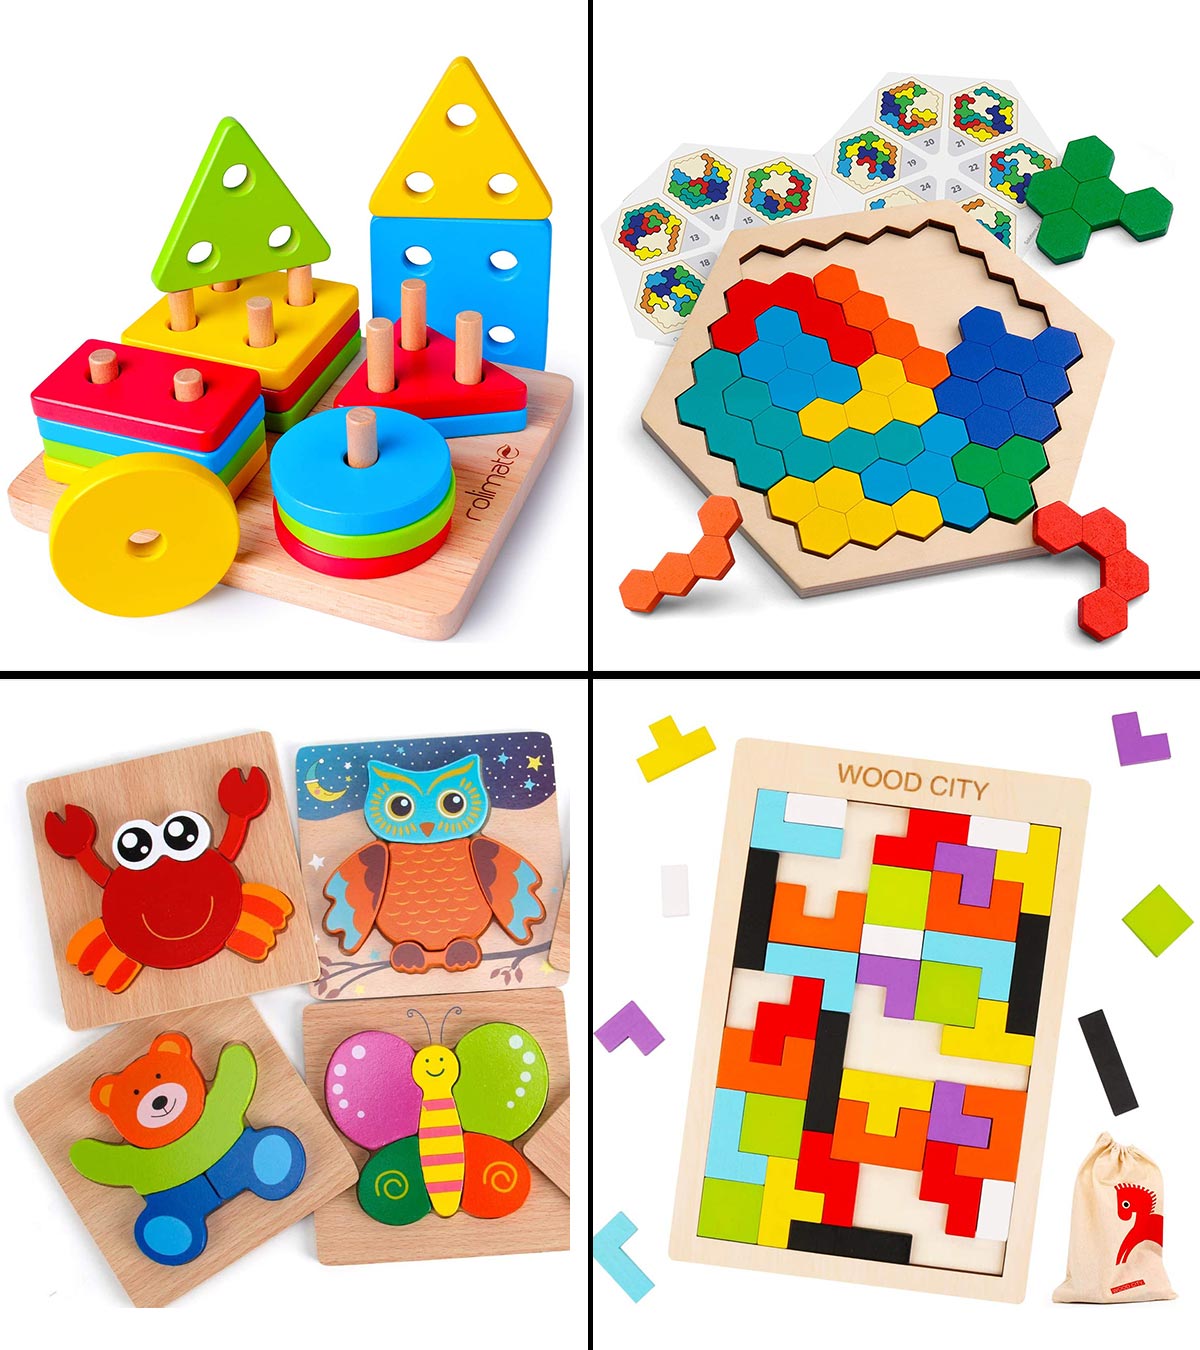 Wooden puzzles For kids picture puzzleAll Types Of Jobs Picture Puzzle 